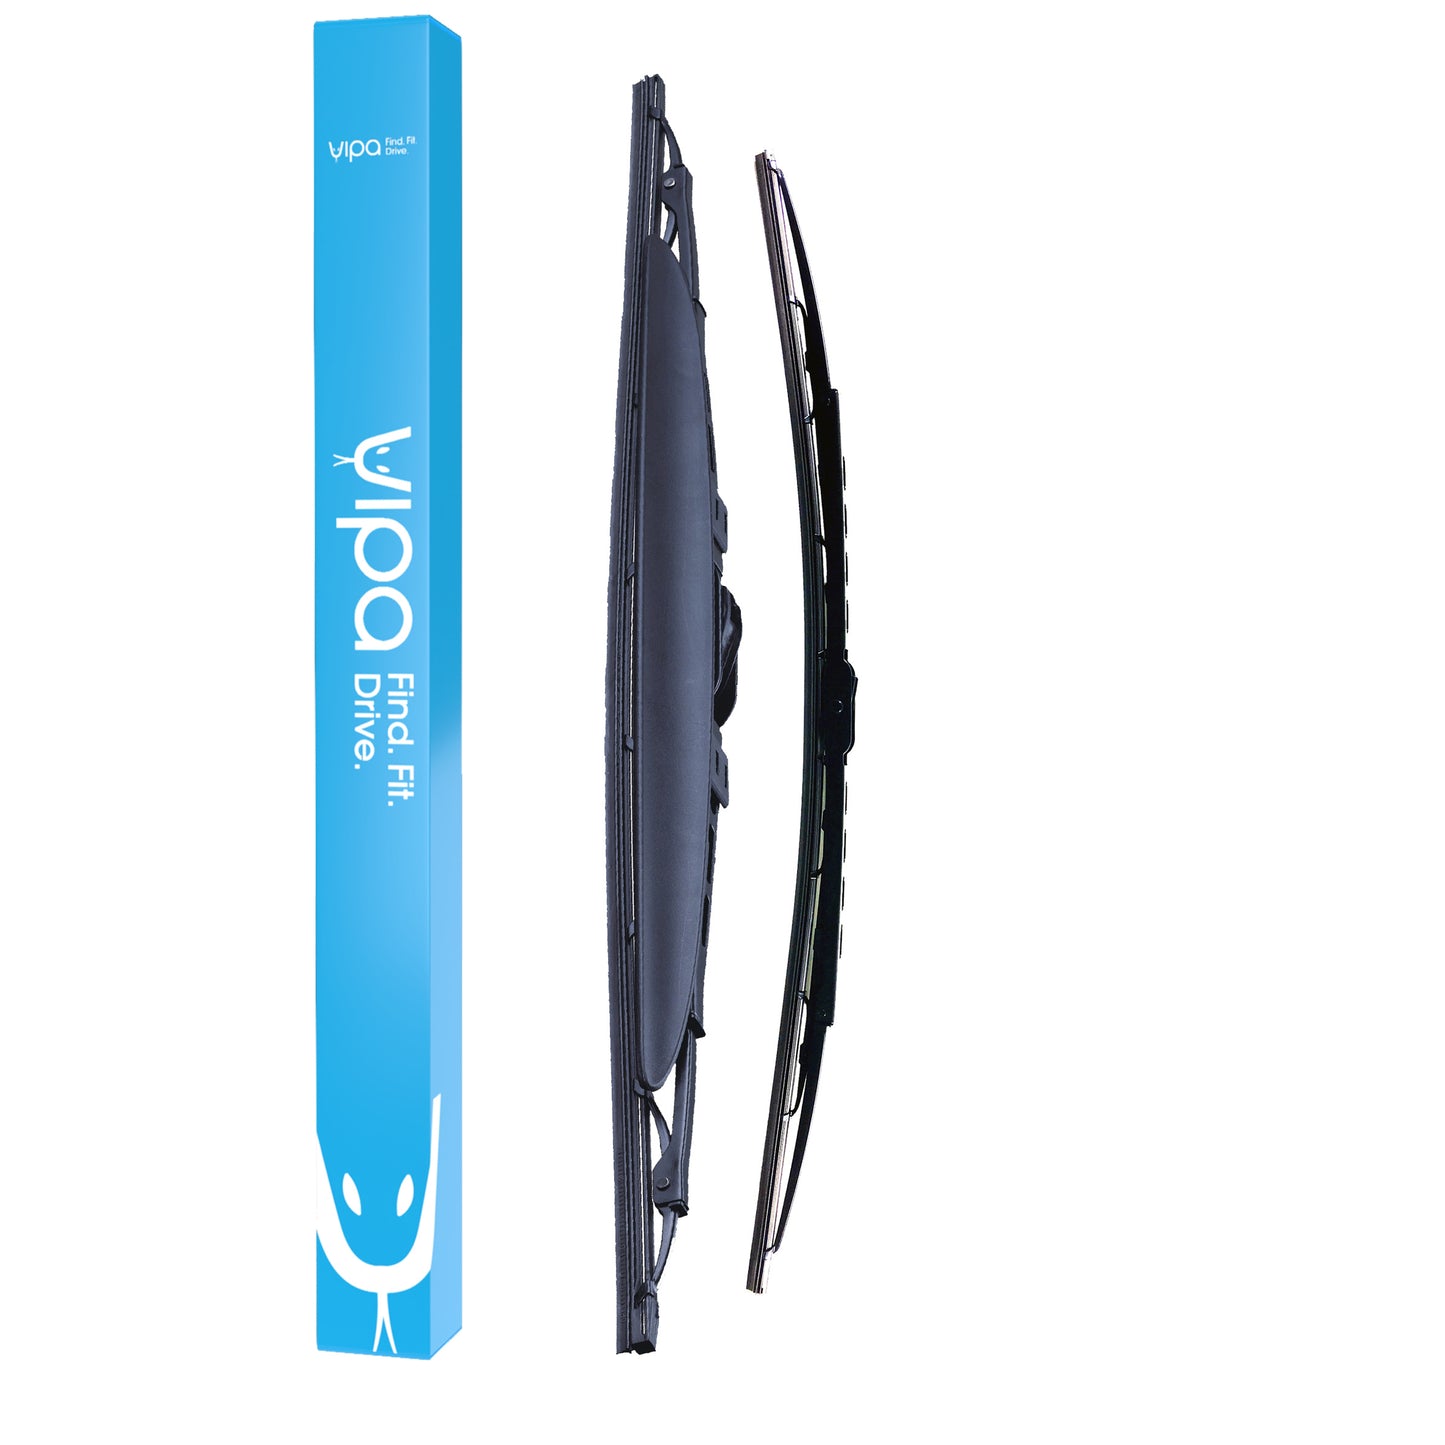 VOLVO XC70 CROSS COUNTRY Estate Sep 2002 to Oct 2007 Wiper Blade Kit